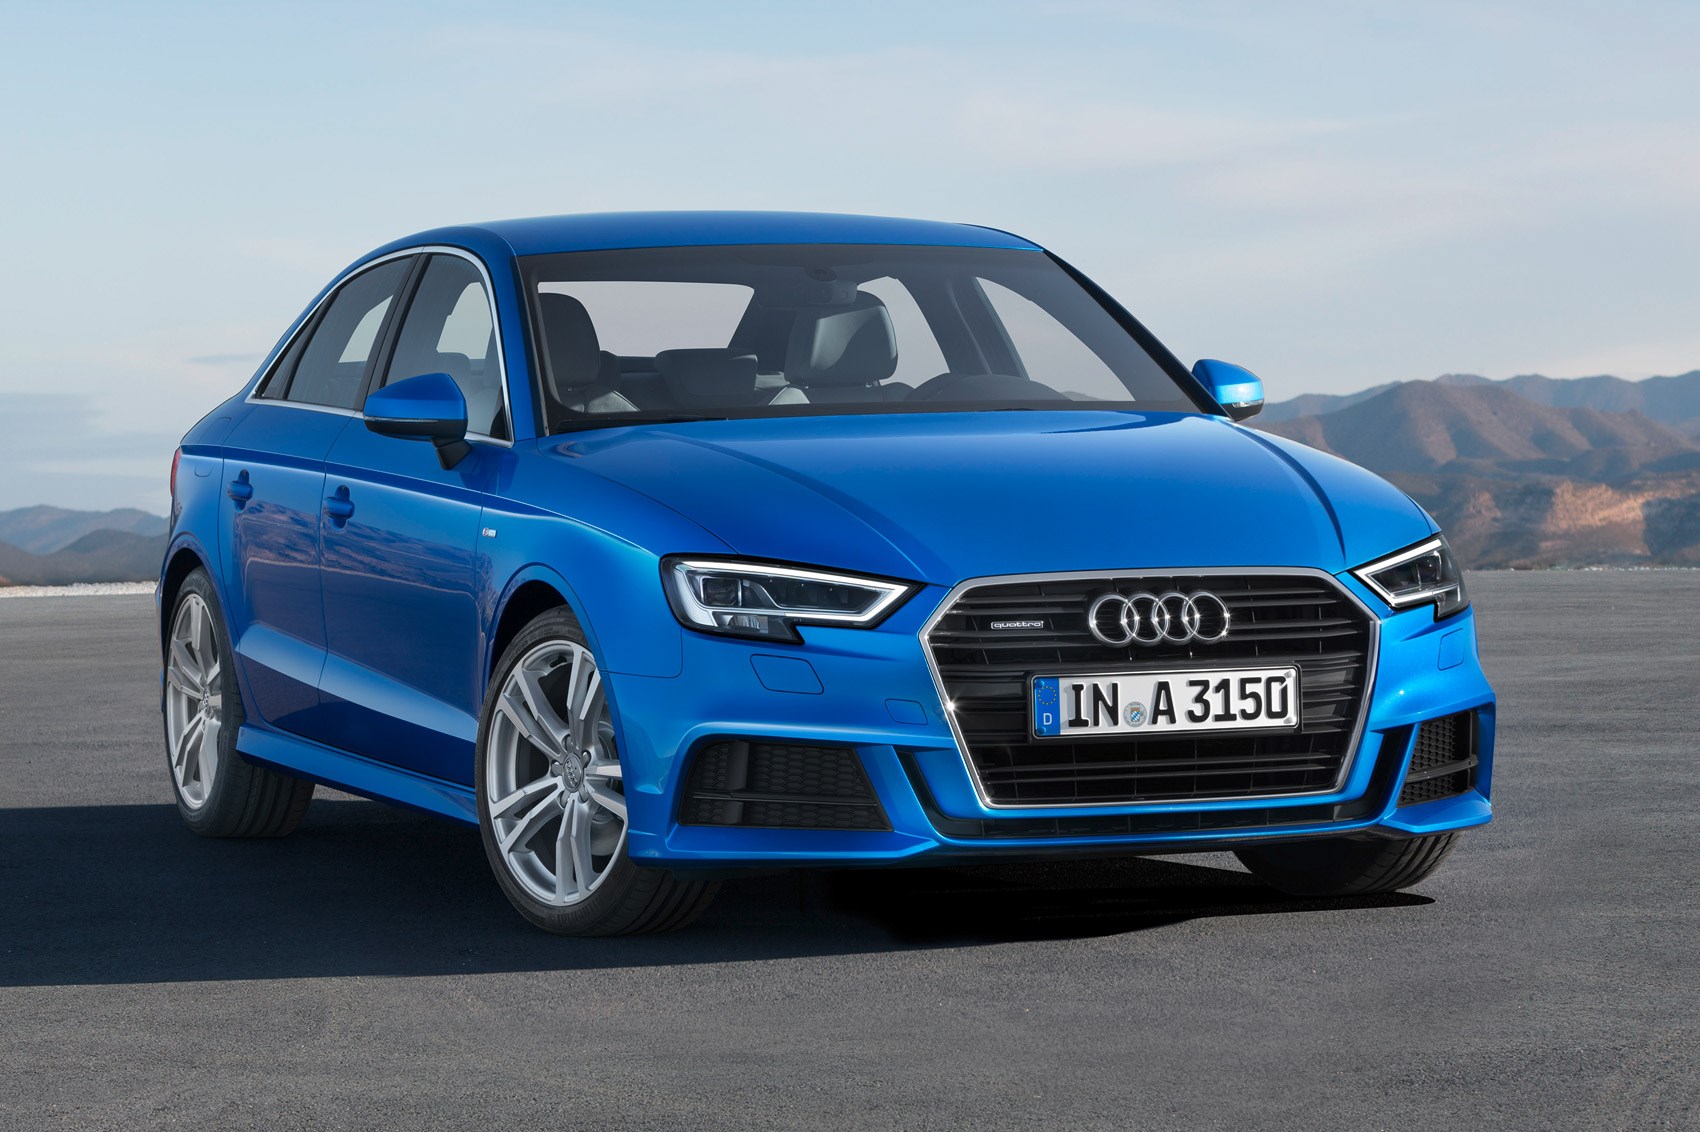 How Much It Cost To Rent Audi A3 In Dubai 